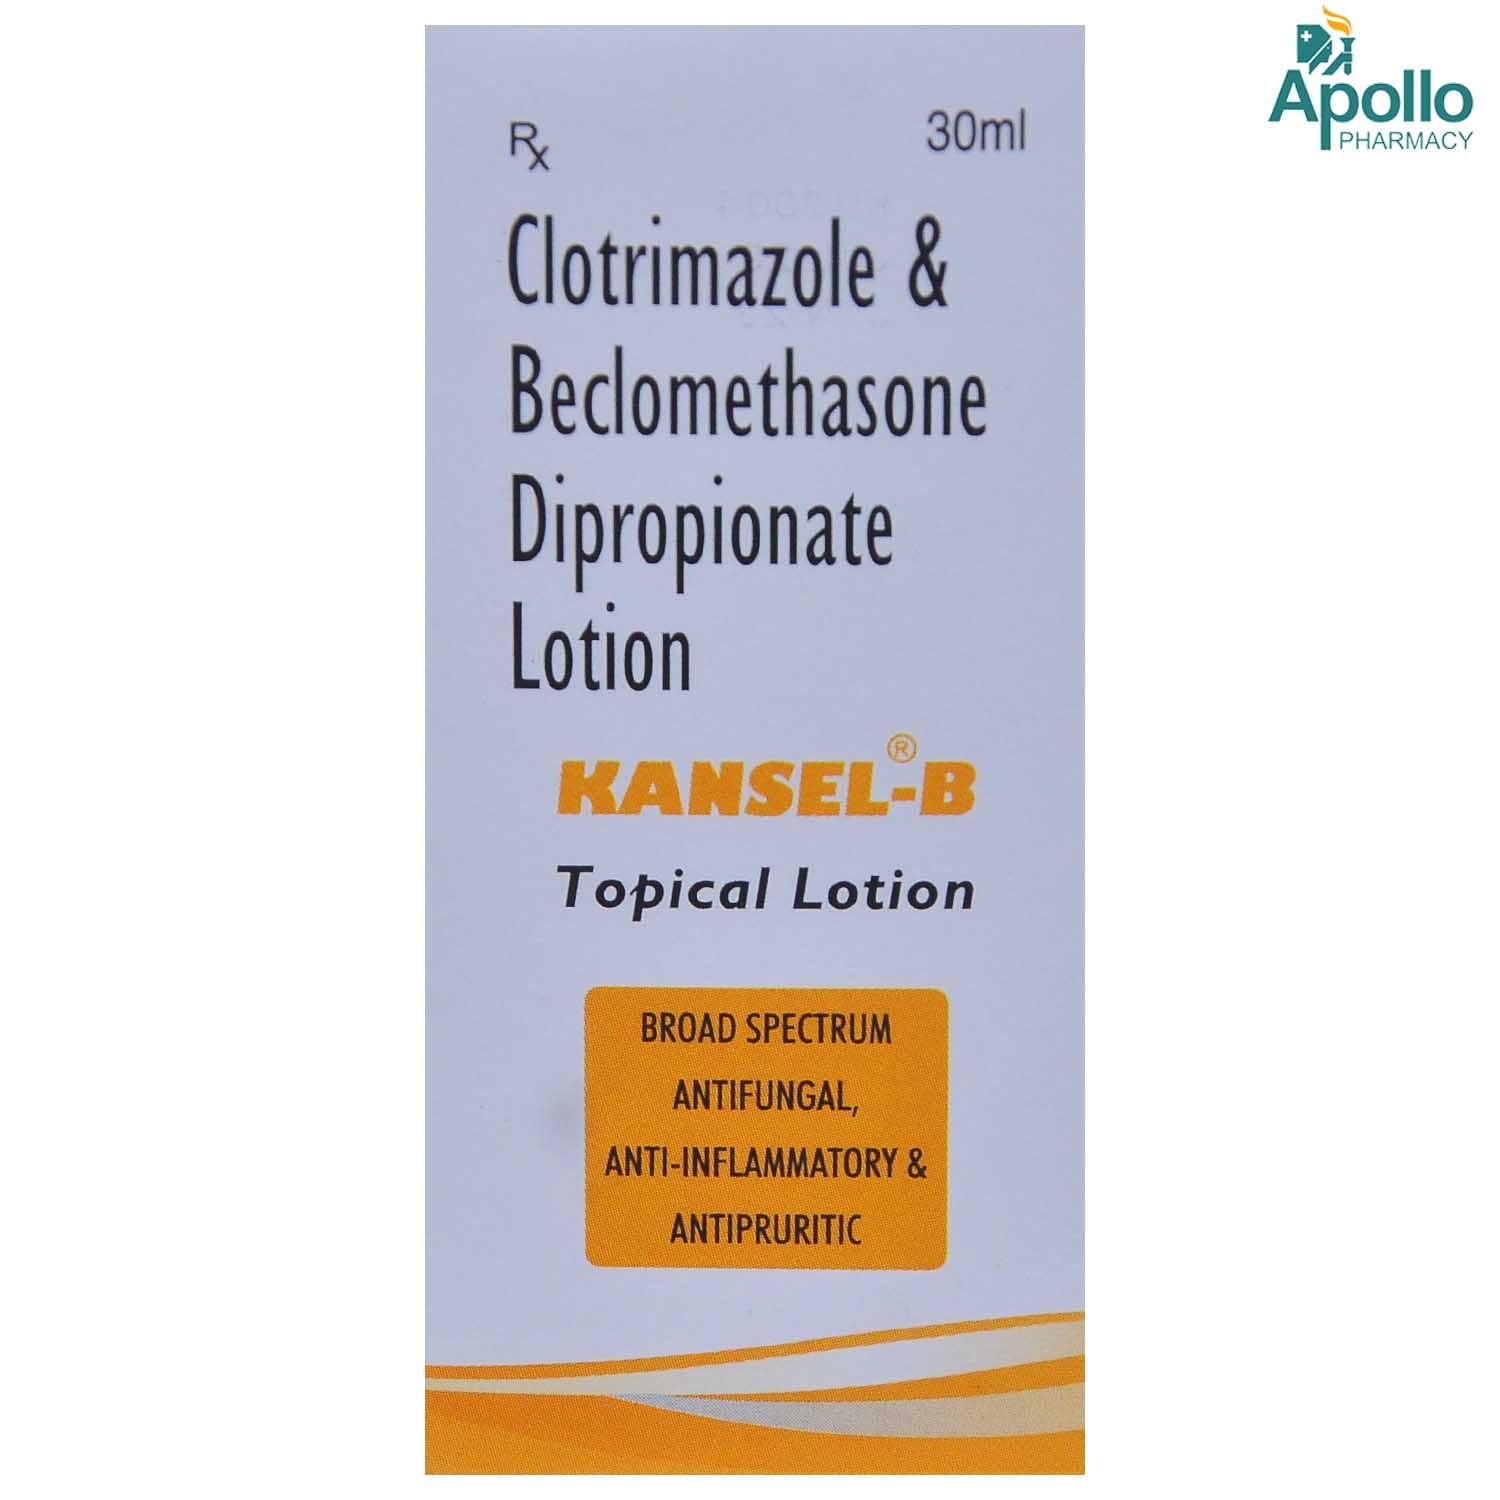 Kansel-B Lotion 30 ml Price, Uses, Side Effects, Composition - Apollo  Pharmacy